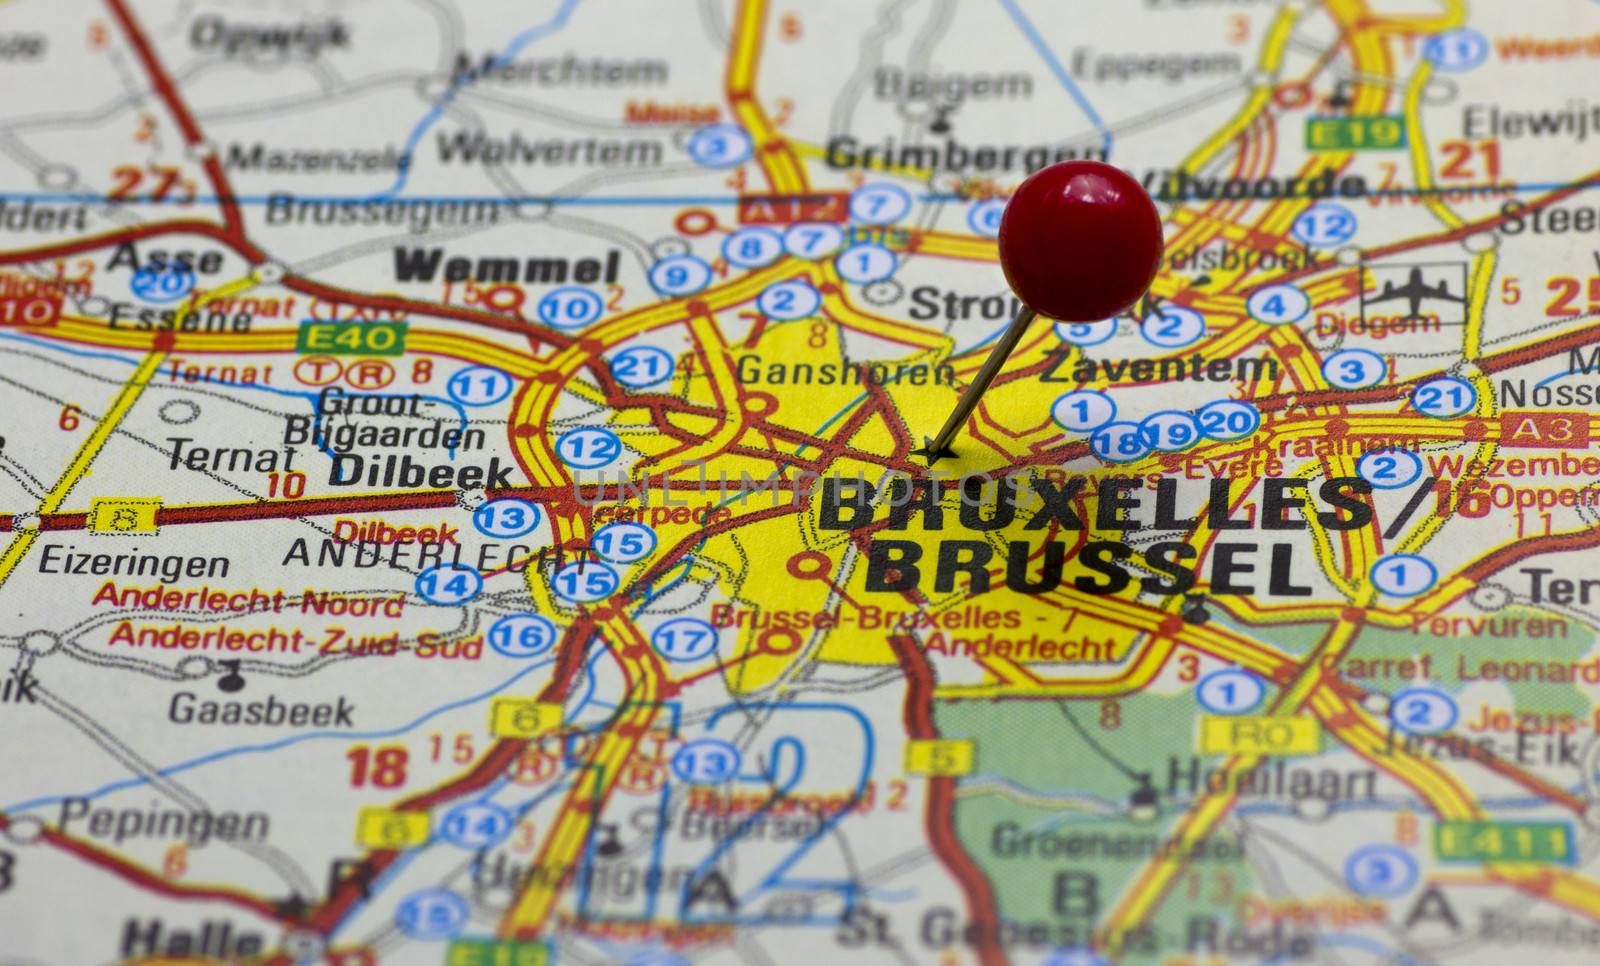 Brussels pointed with red push pin by jurgenfr